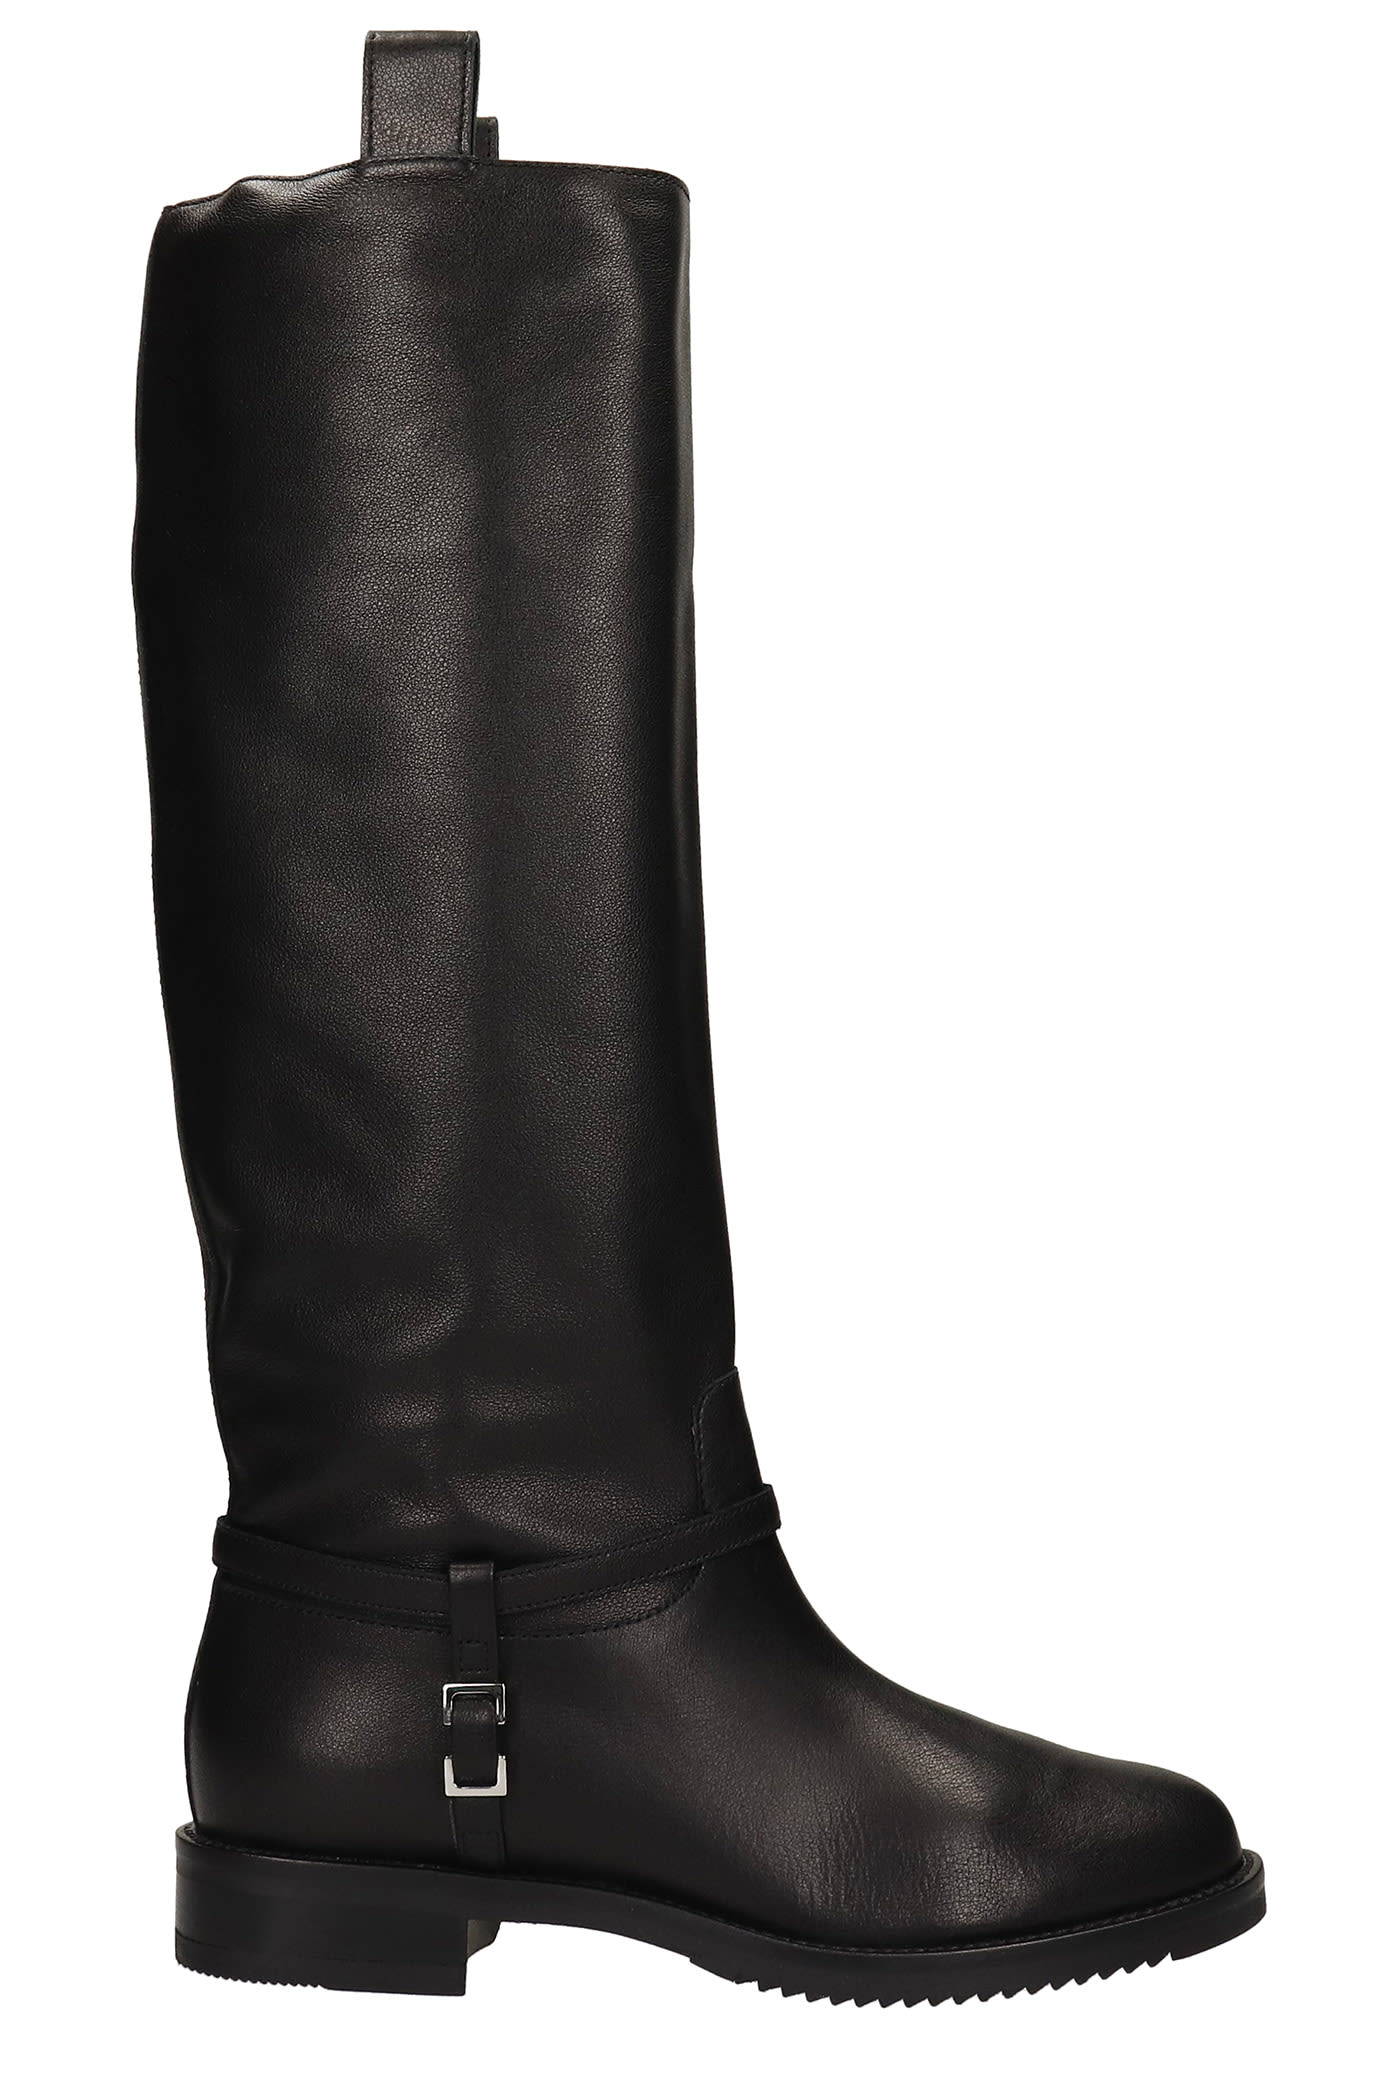 Sergio Rossi Low Heels Boots In Black Leather